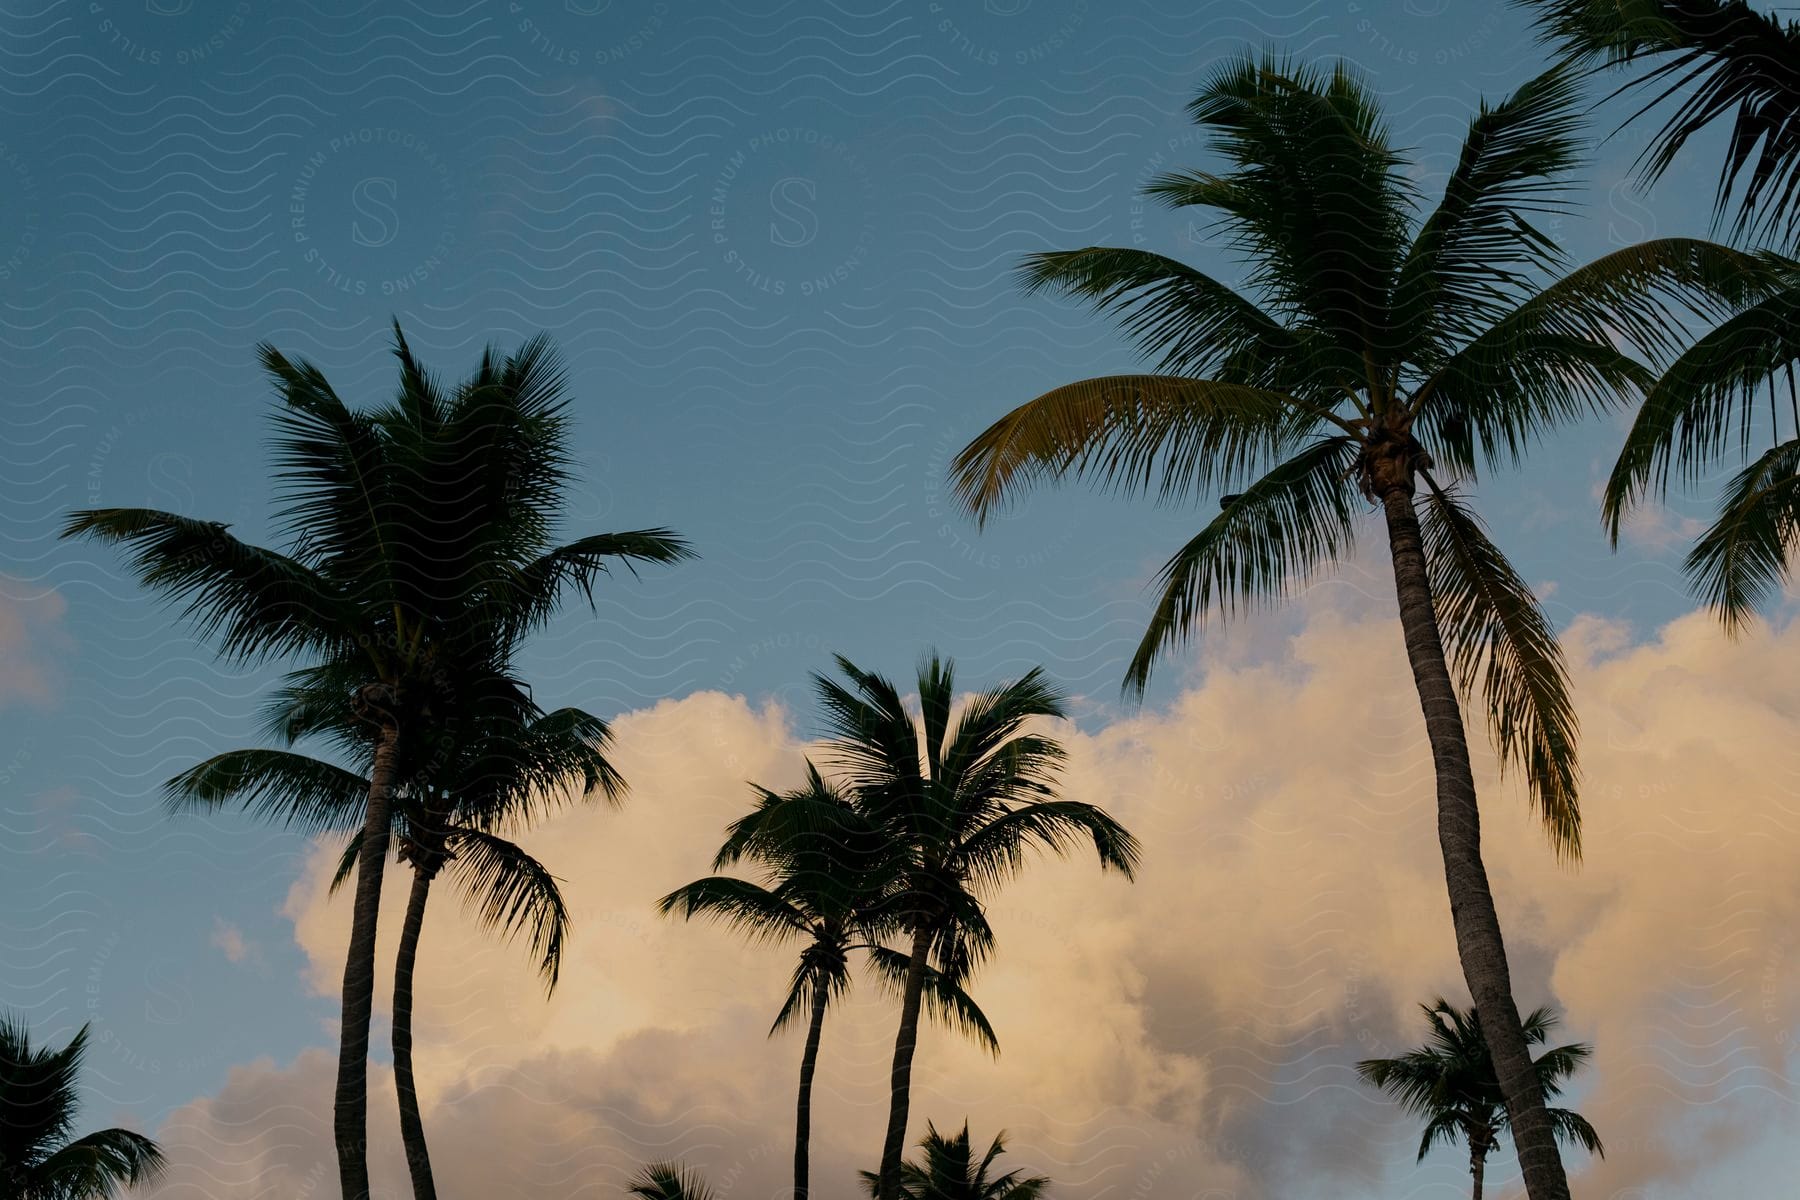 Natural landscape with coconut trees in a morning blue sky and clouds